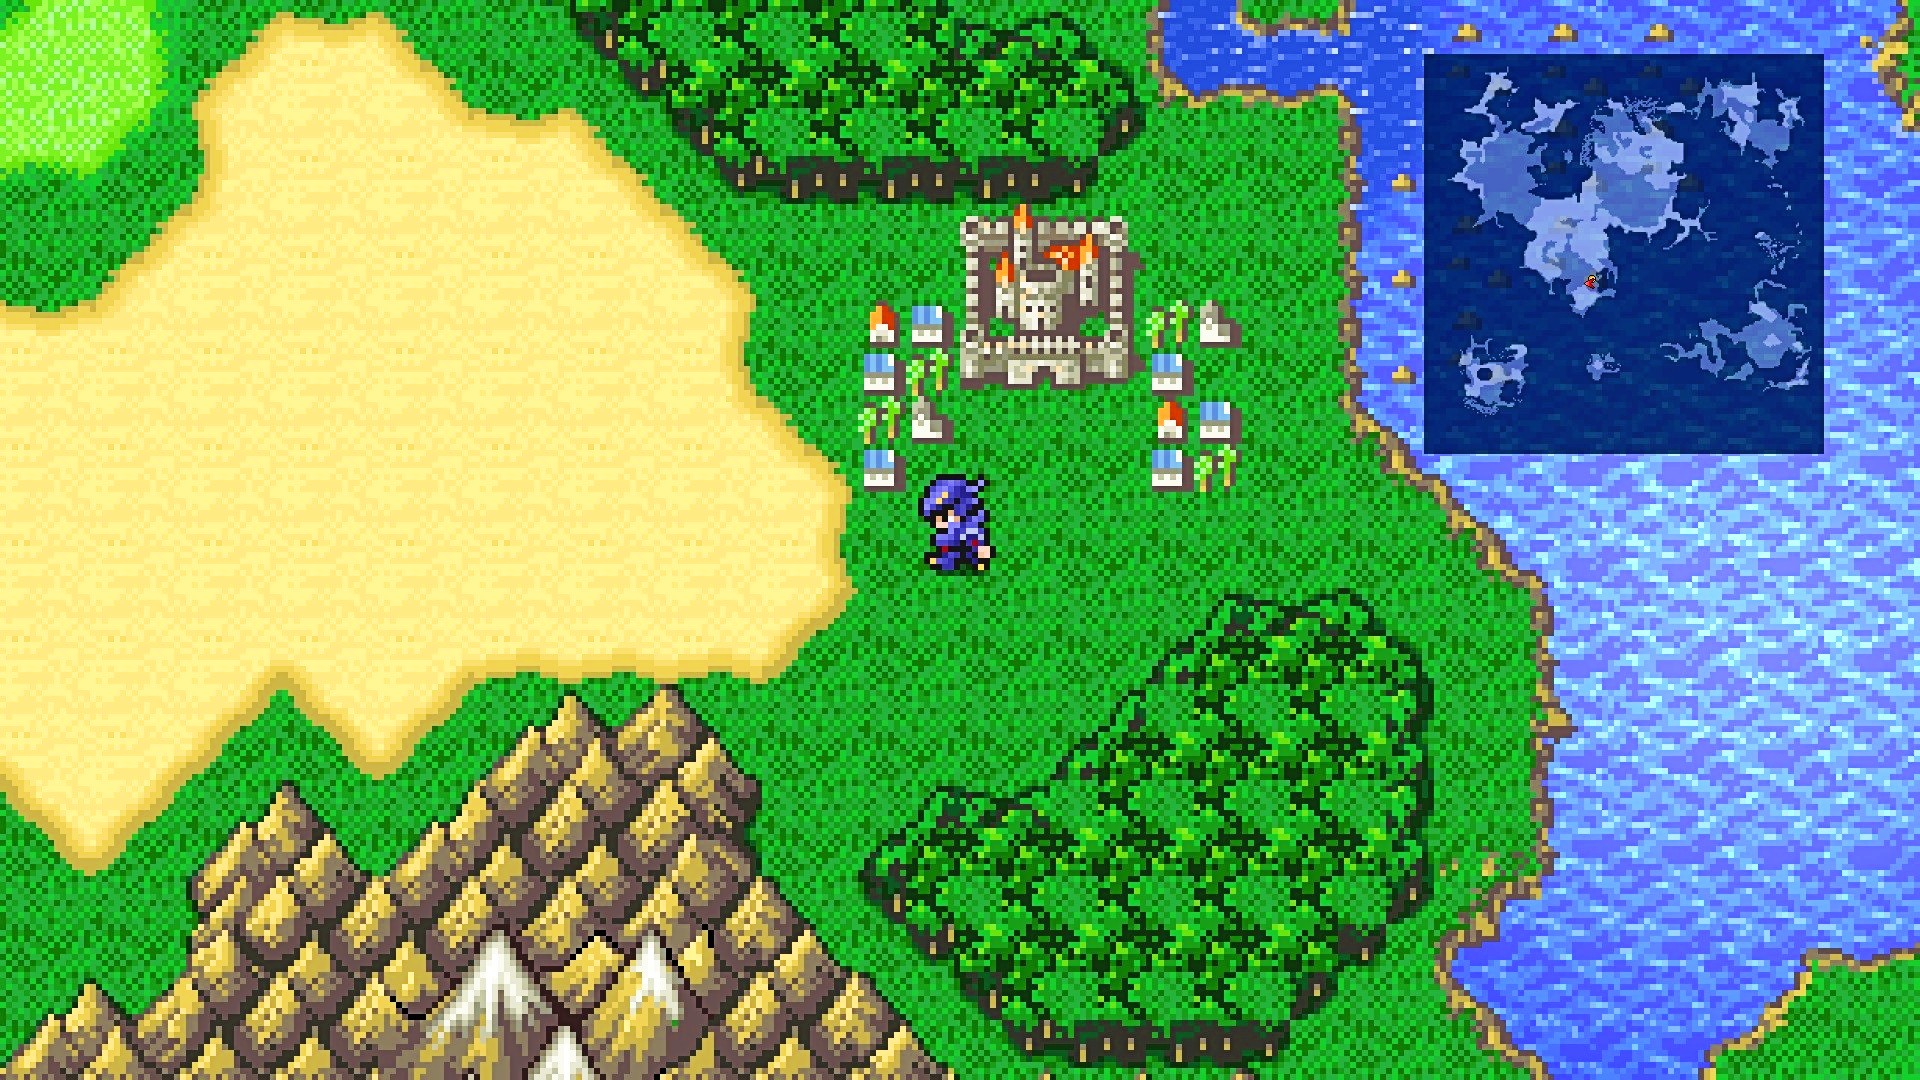 Final Fantasy 4’s pixel remaster is out next month